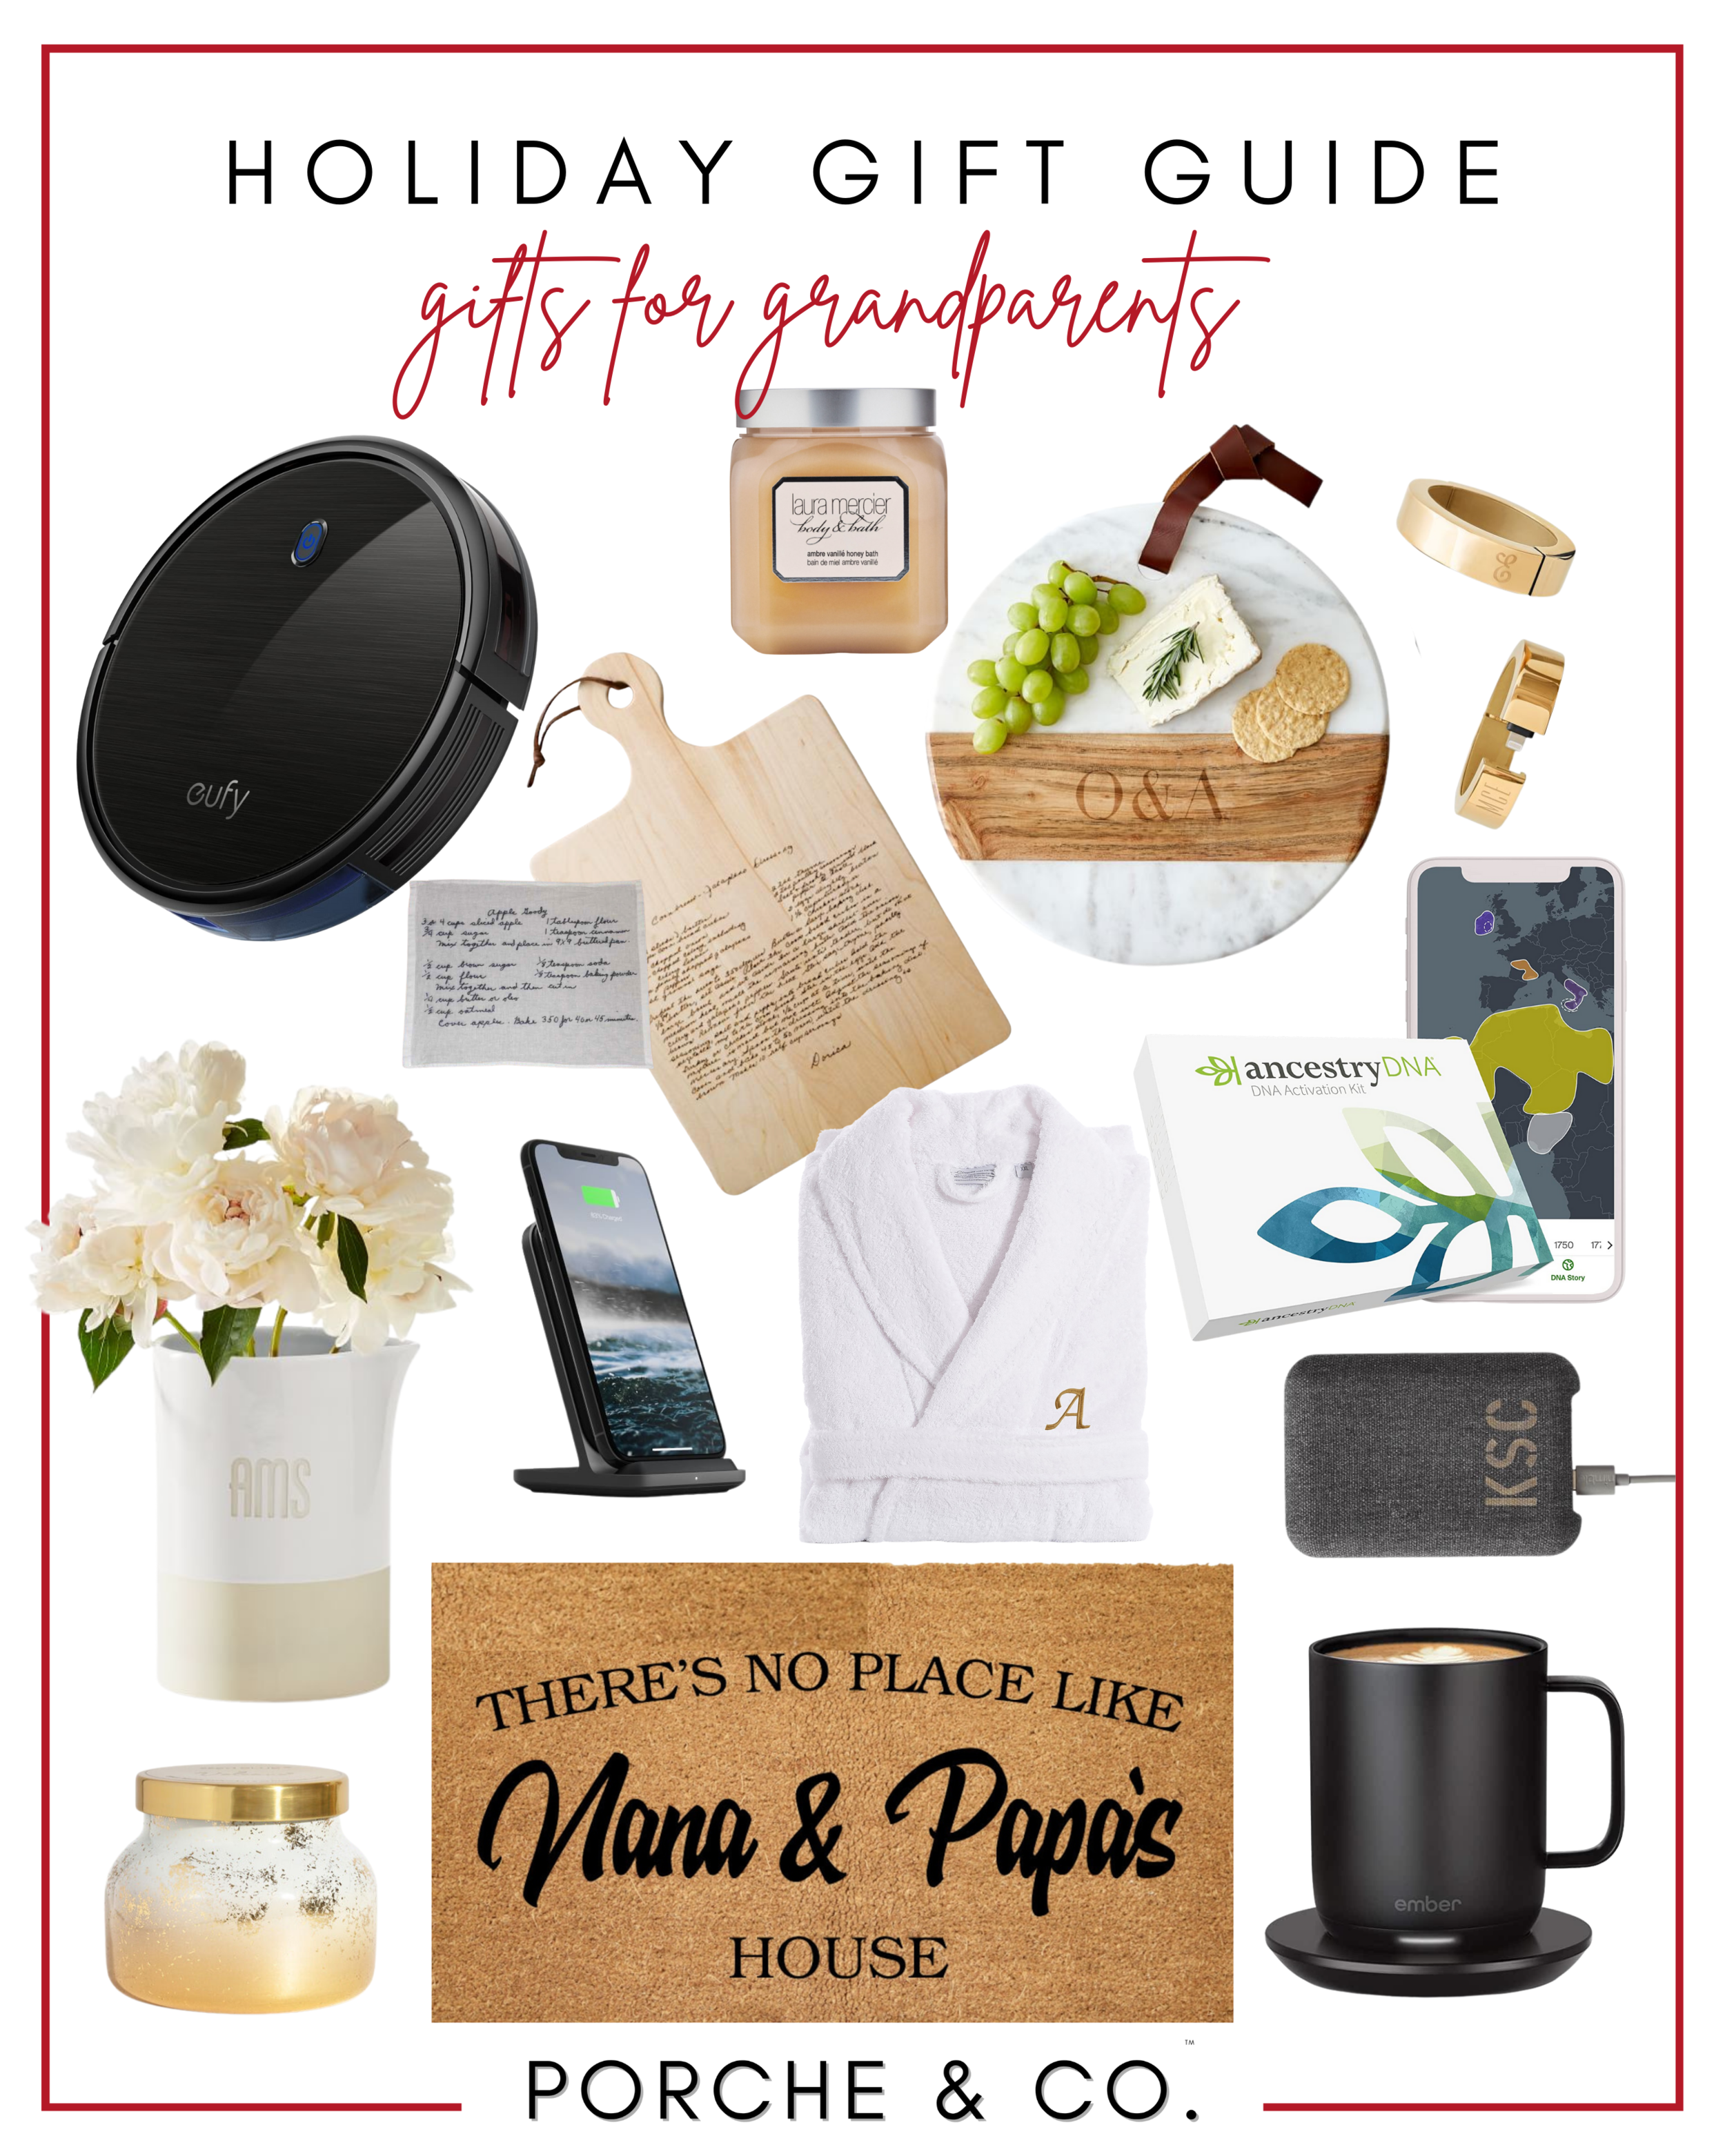 gifts for grandparents (Copy)